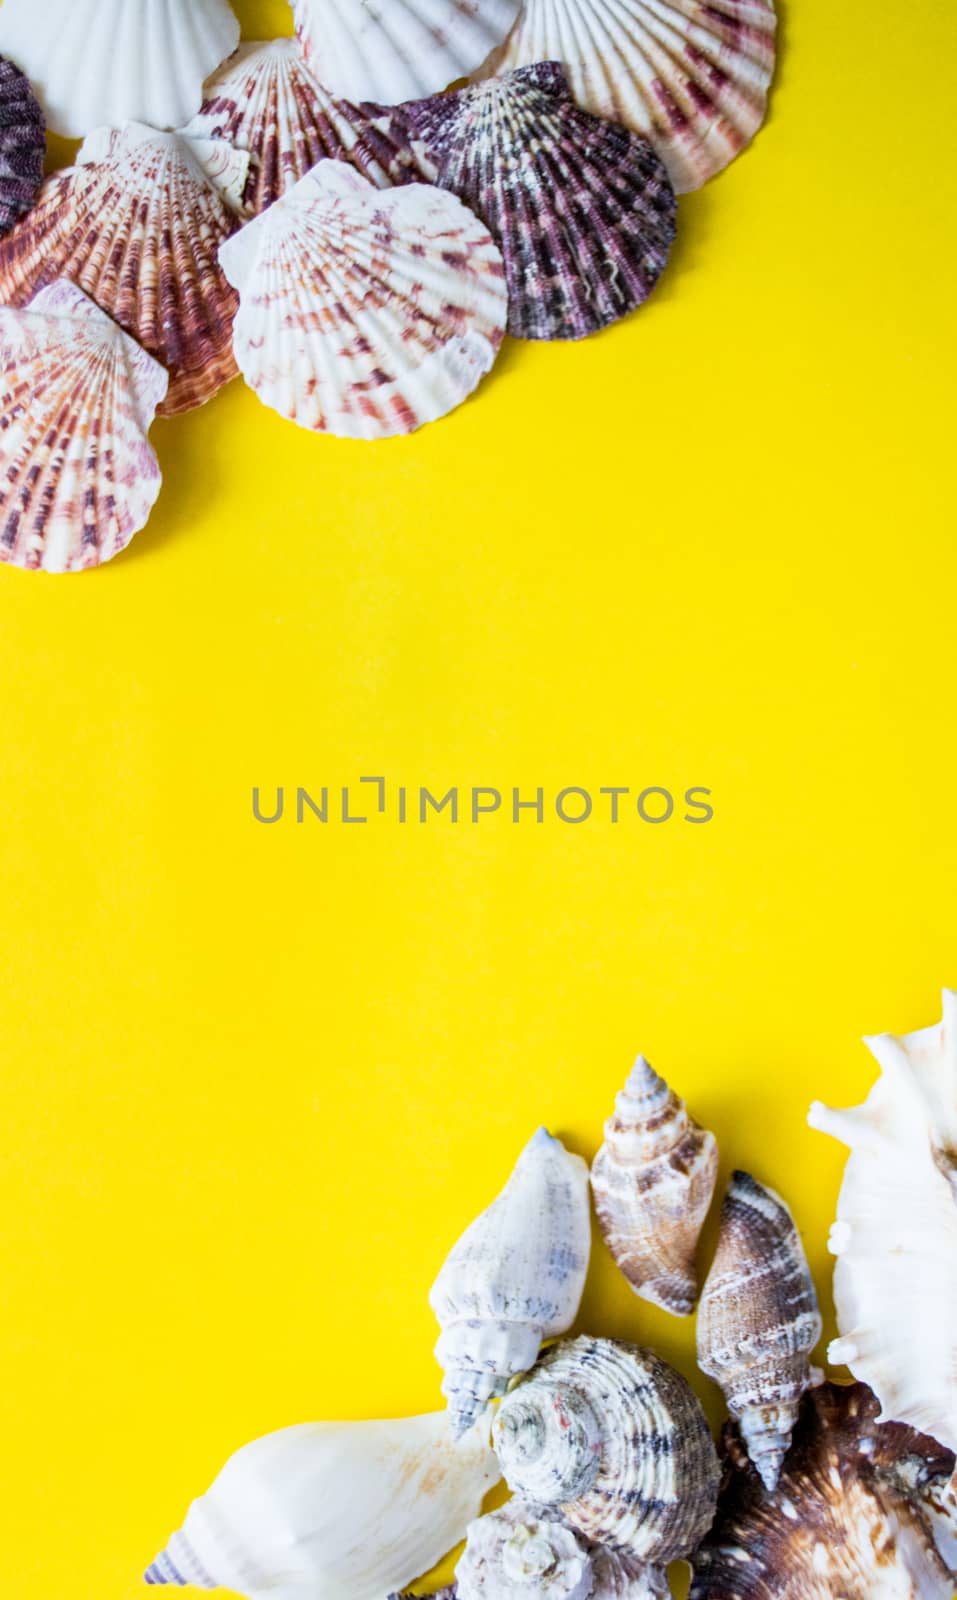 Different type of seashells in the corners of the yellow background